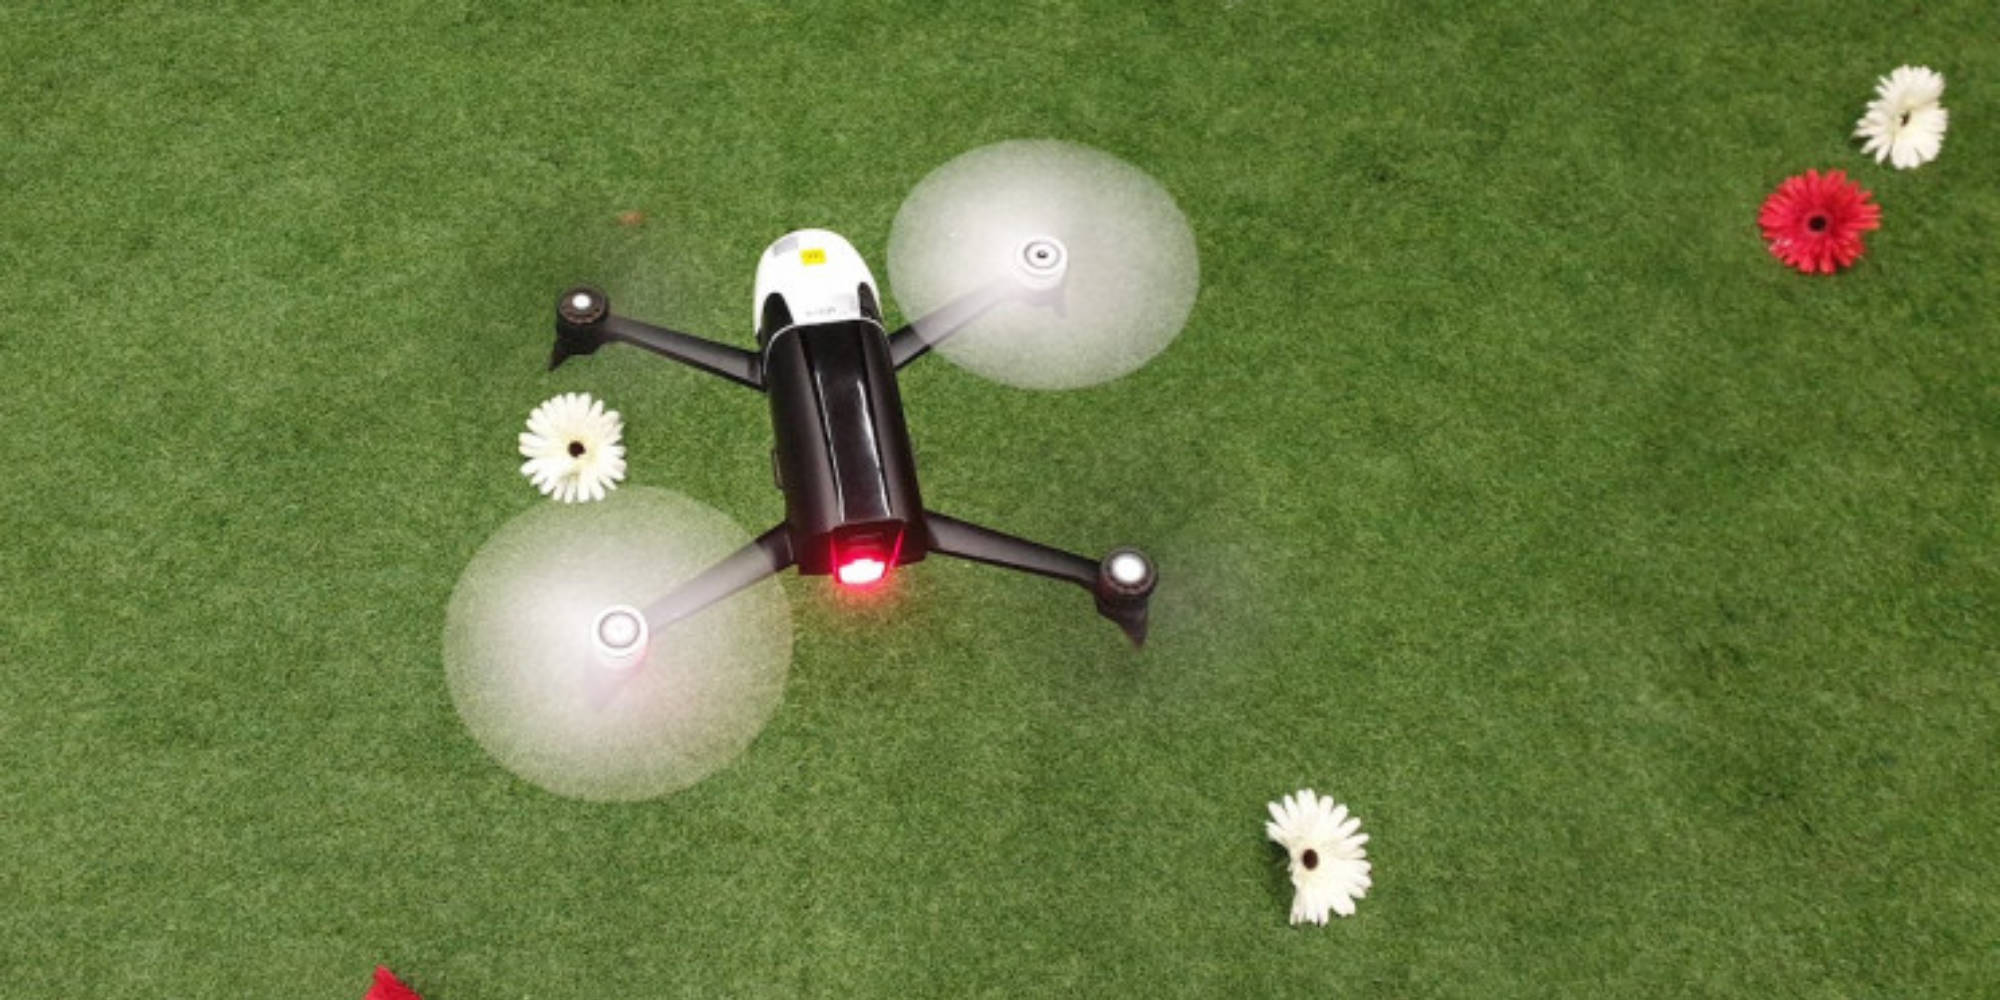 Mechanical gripper allows drones to hang from objects